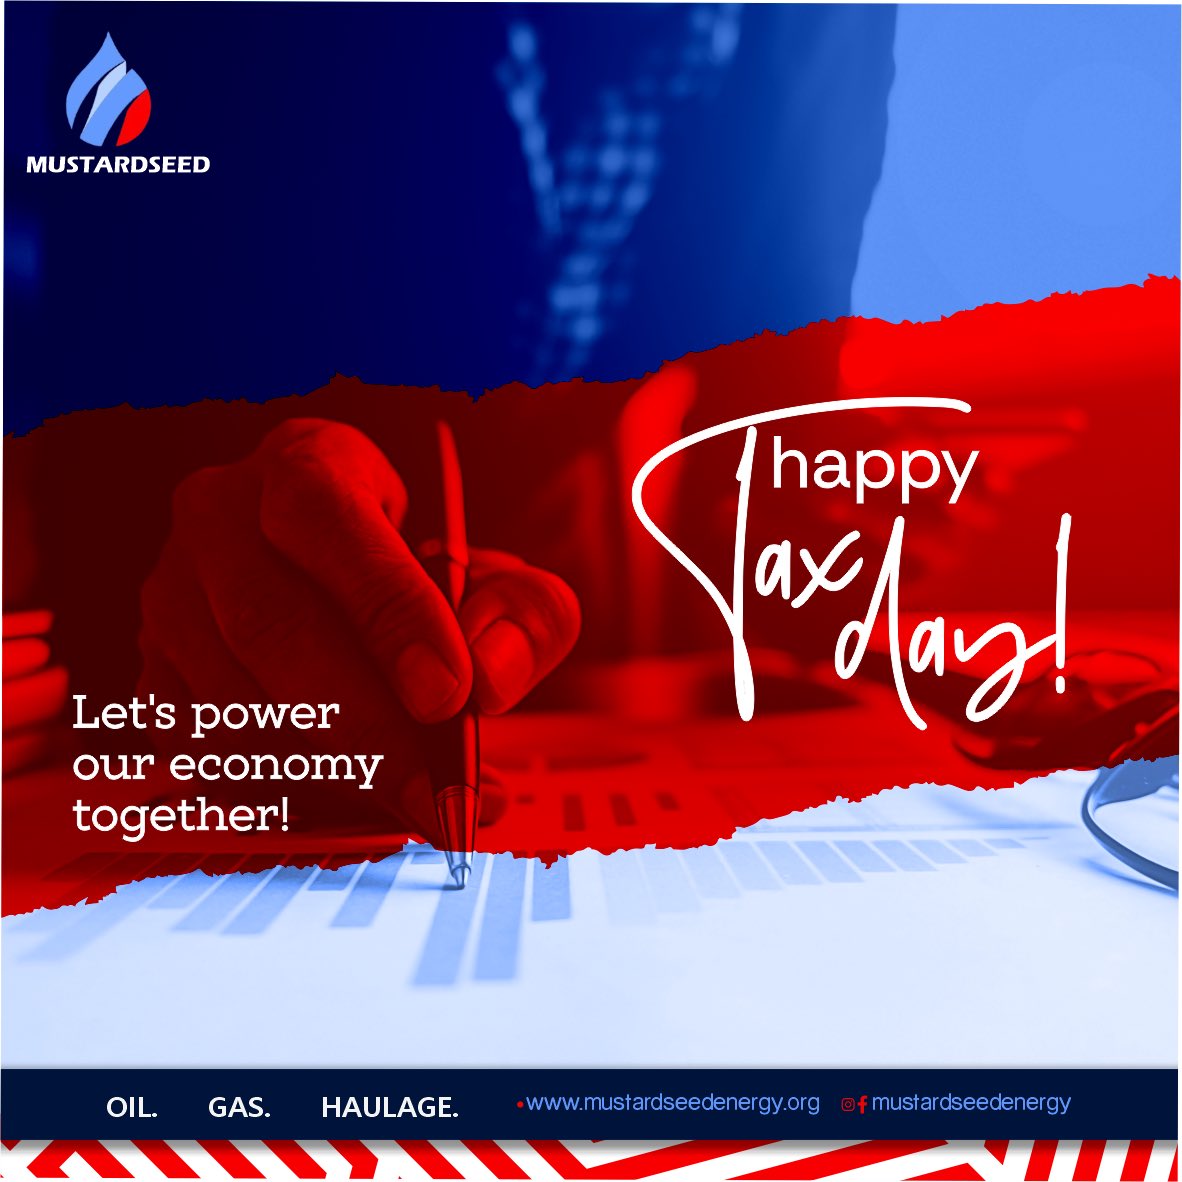 Fueling our success while navigating tax Day!
Together we can make a great nation.
Happy Tax Day!
#mustardseedenergy 
#taxday
#economyproductivity 
#MondayMood